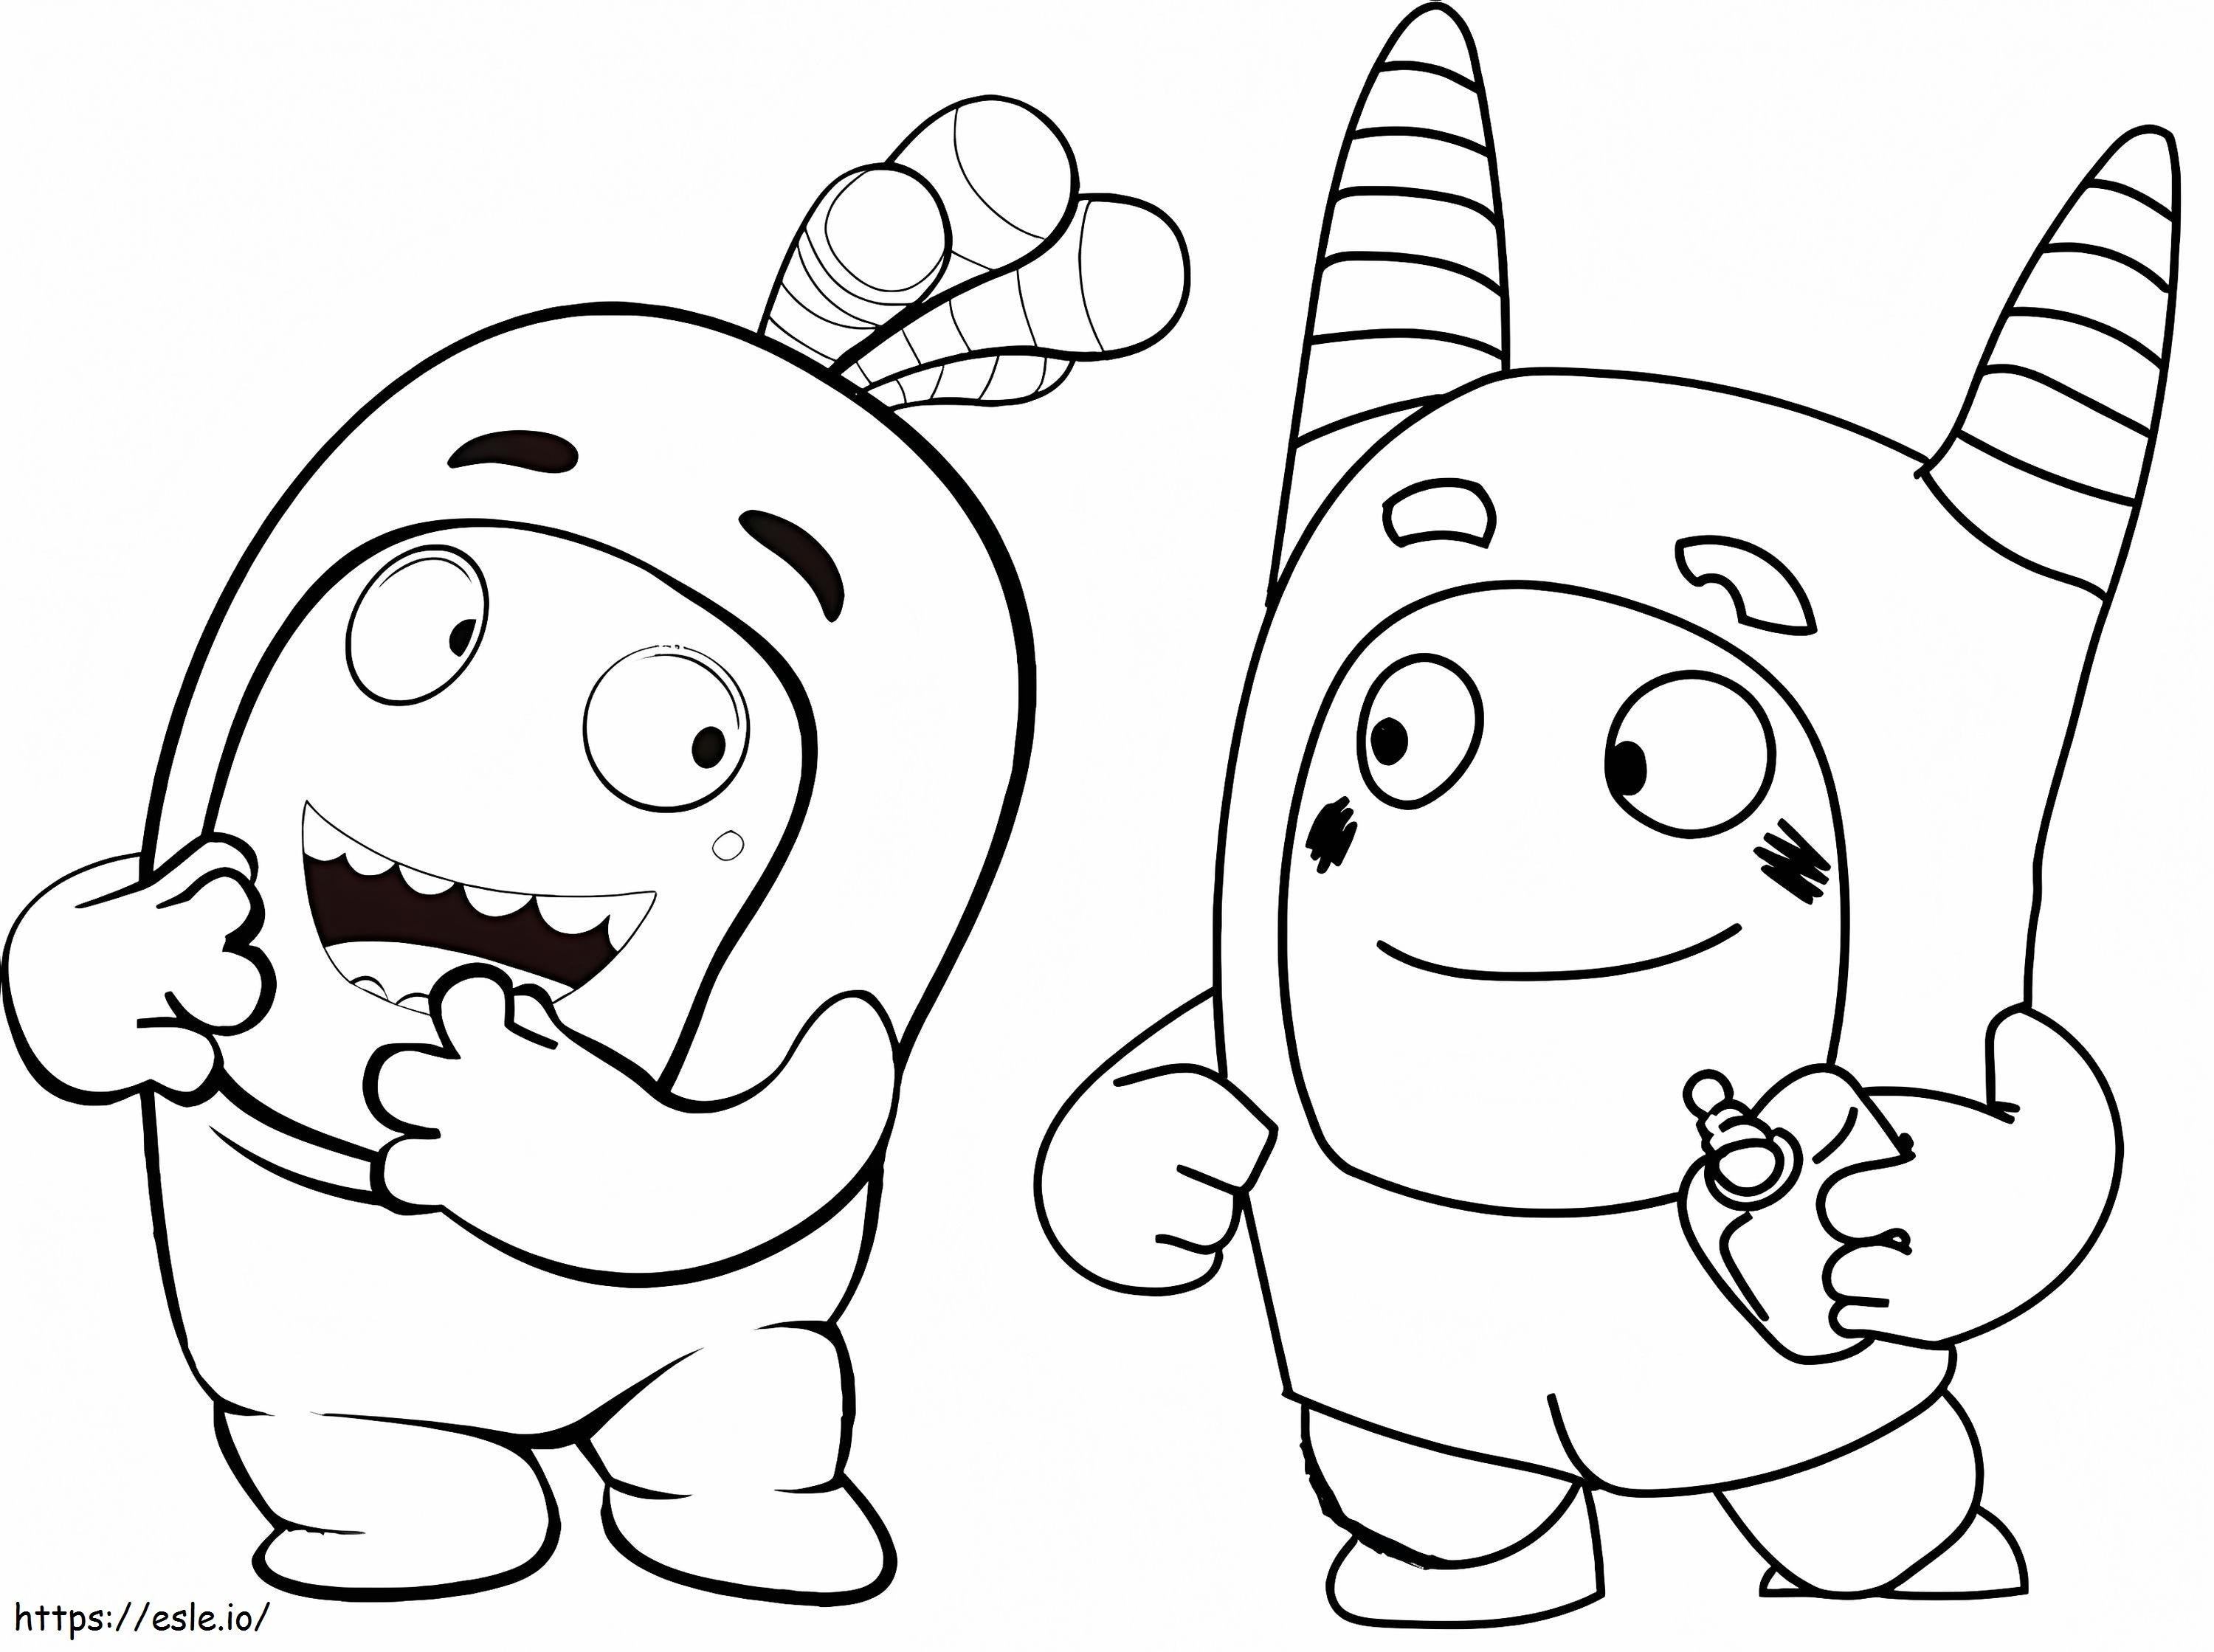 Two Oddbods coloring page